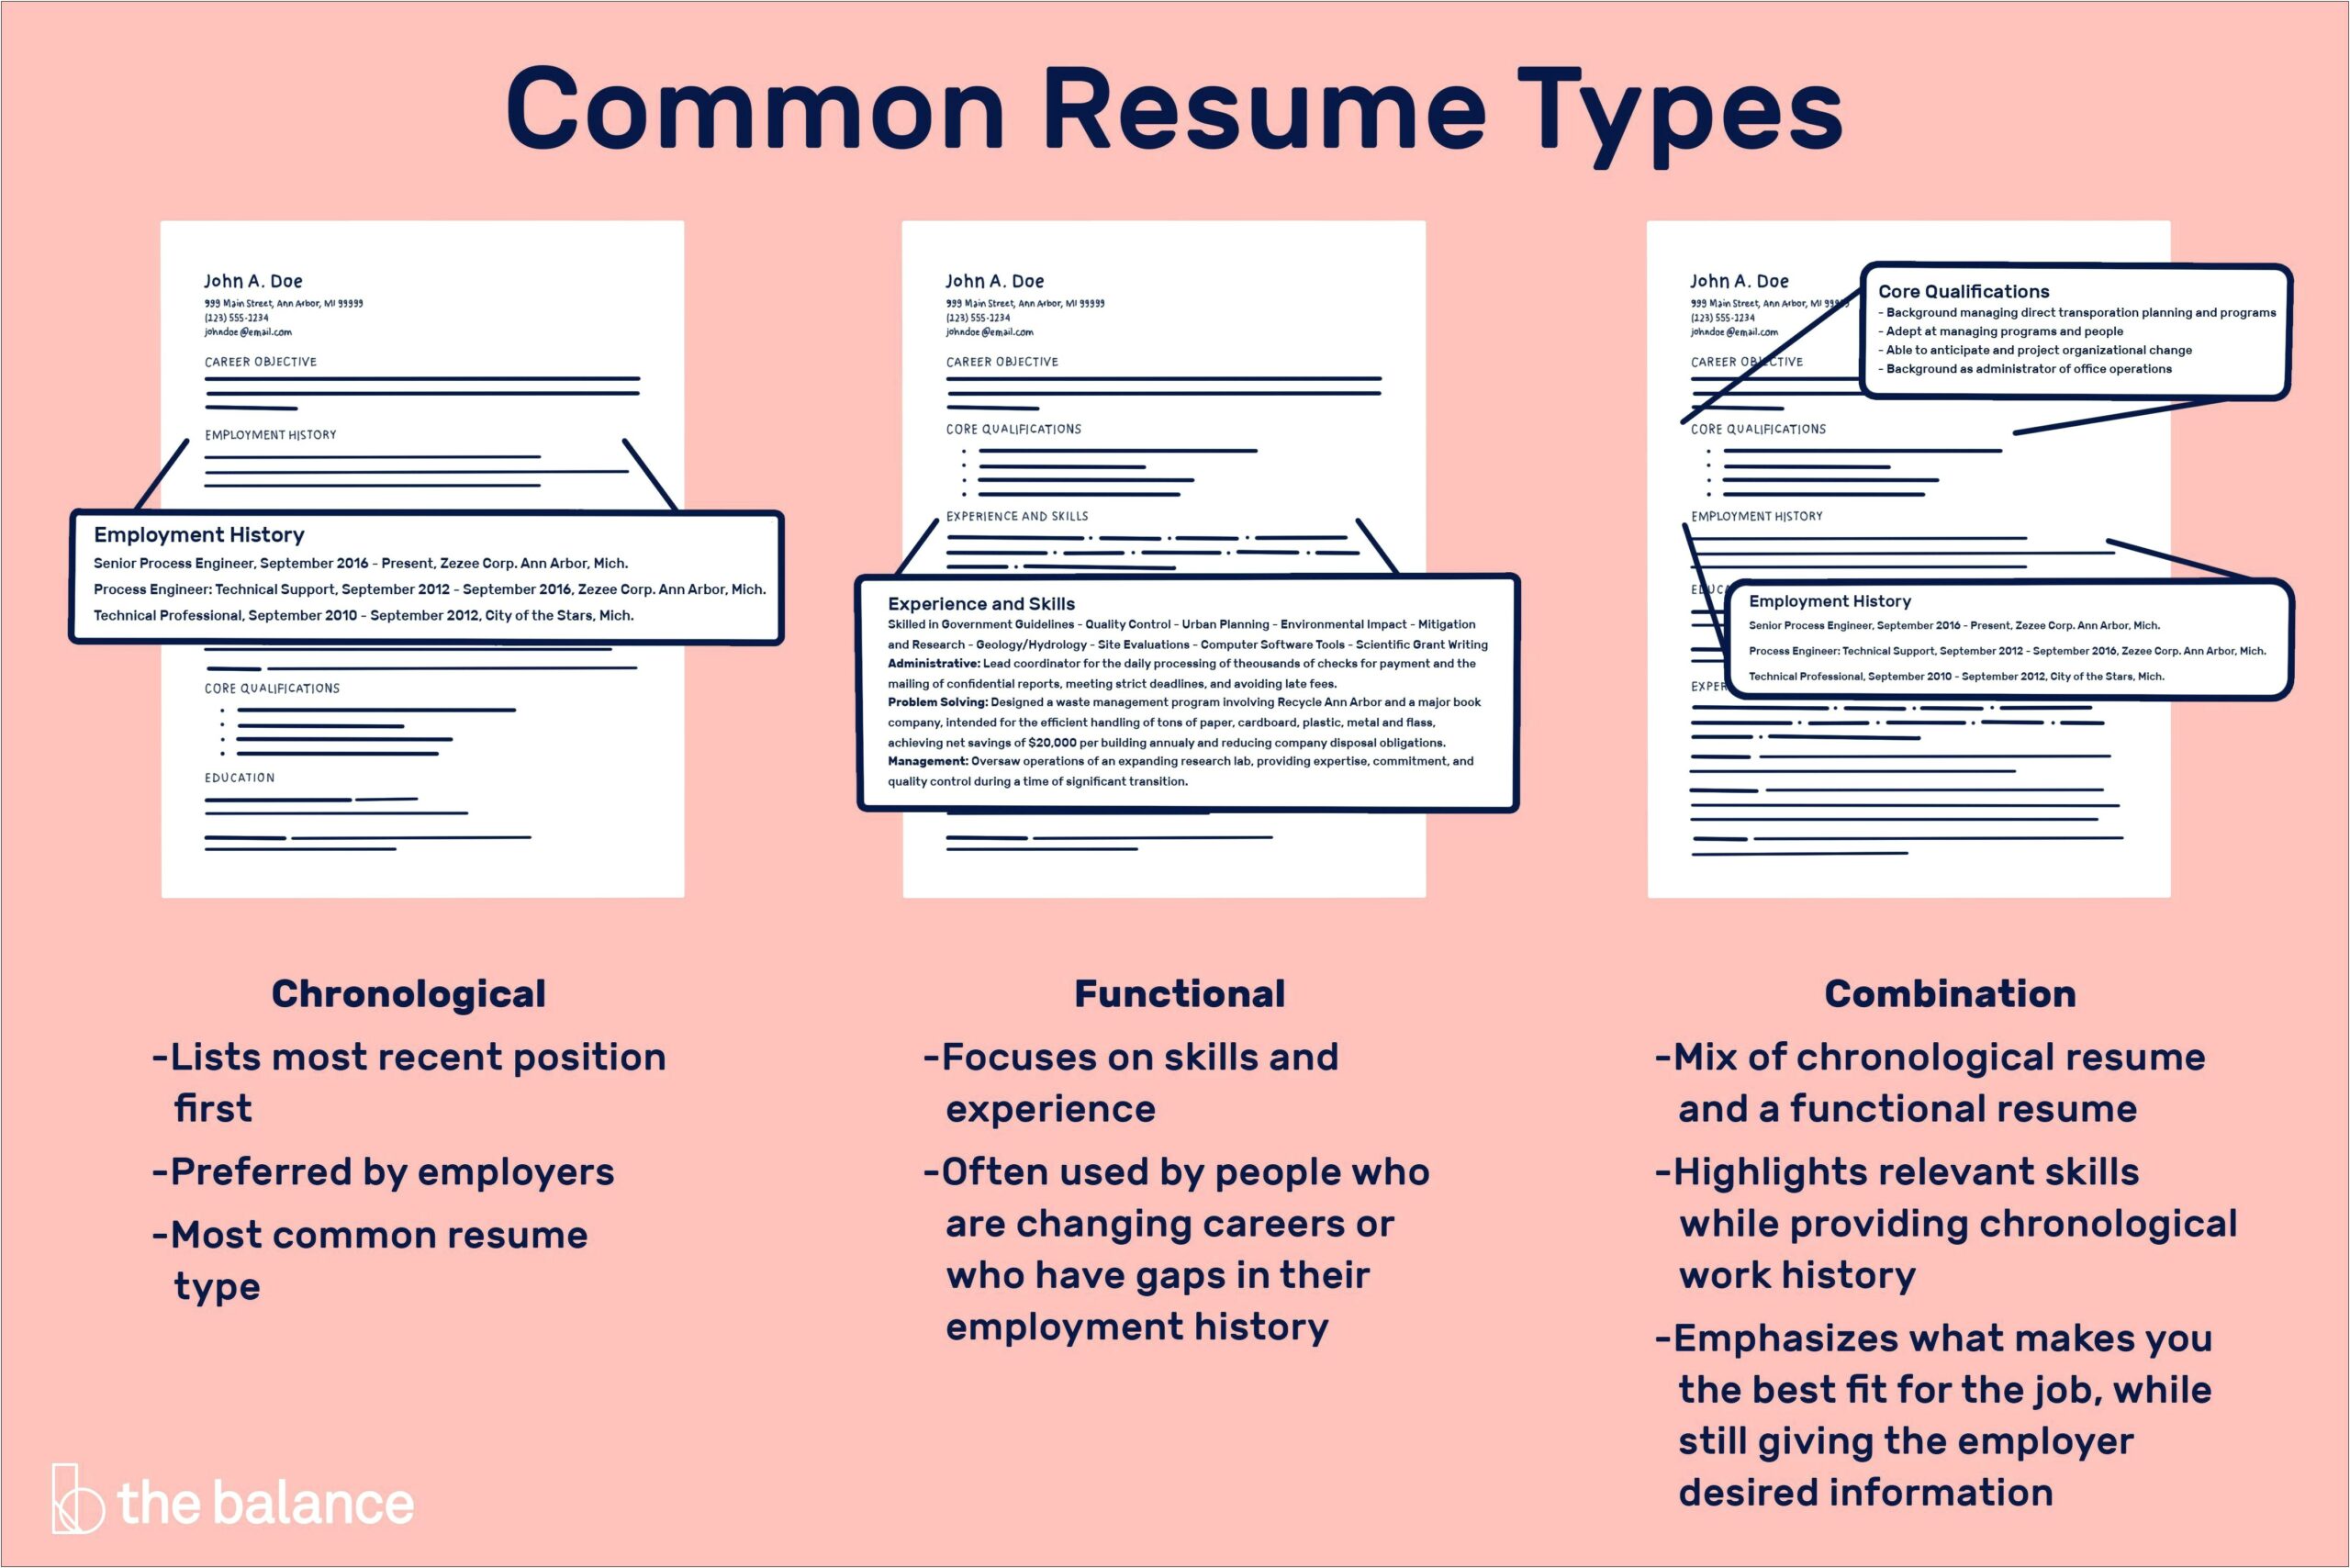 Social Work Resume List Education Or Work First